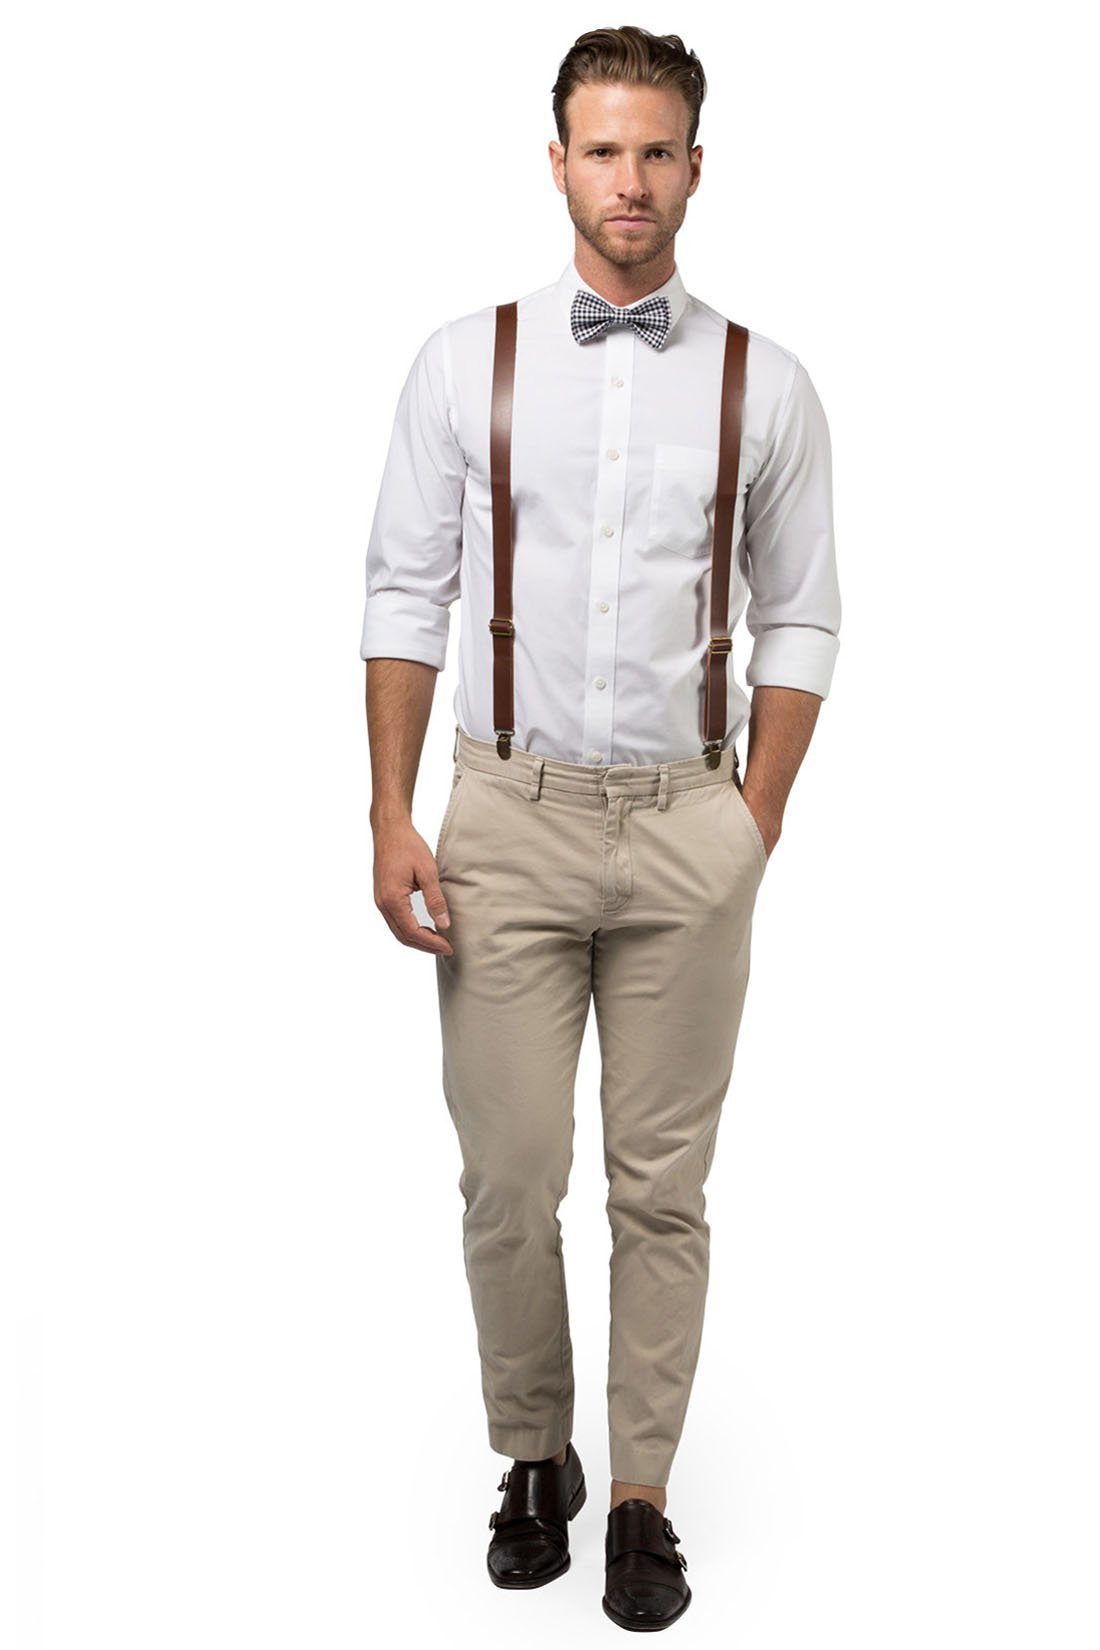 Grey Pants with White Shirt and Suspenders